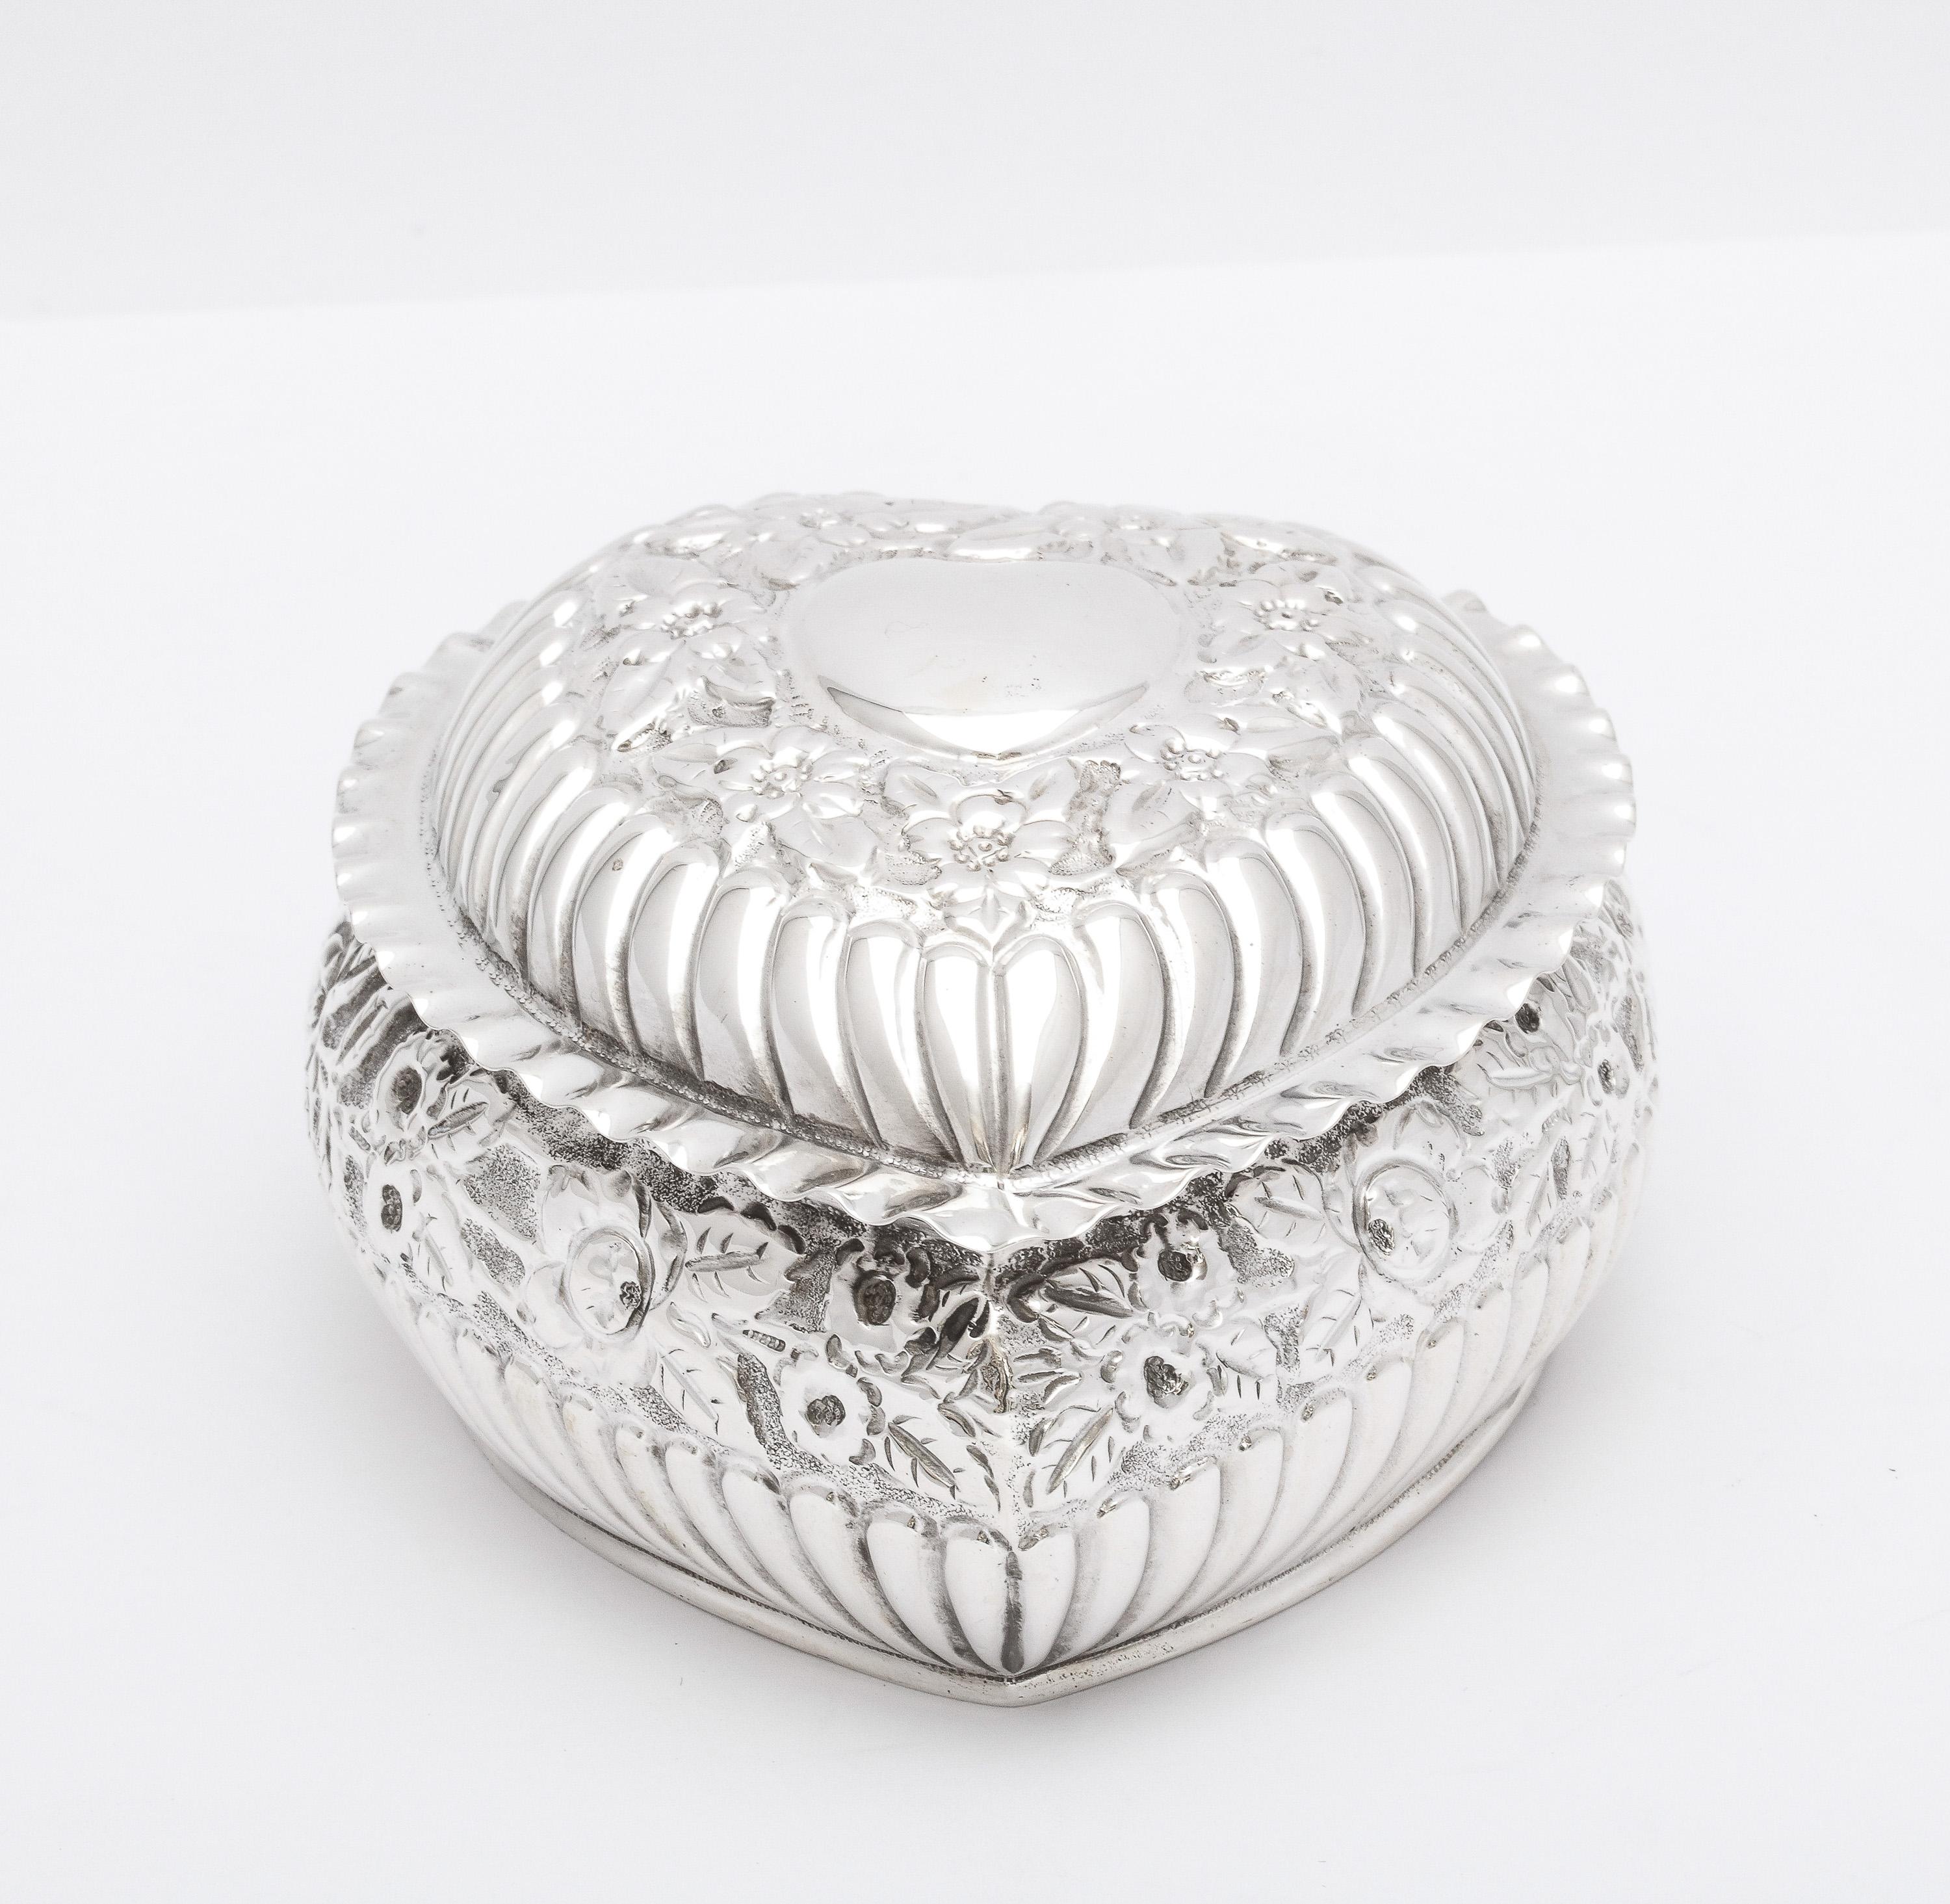 Late 19th Century Victorian Sterling Silver Heart-Form Trinkets Box with Hinged Lid by Zimmerman